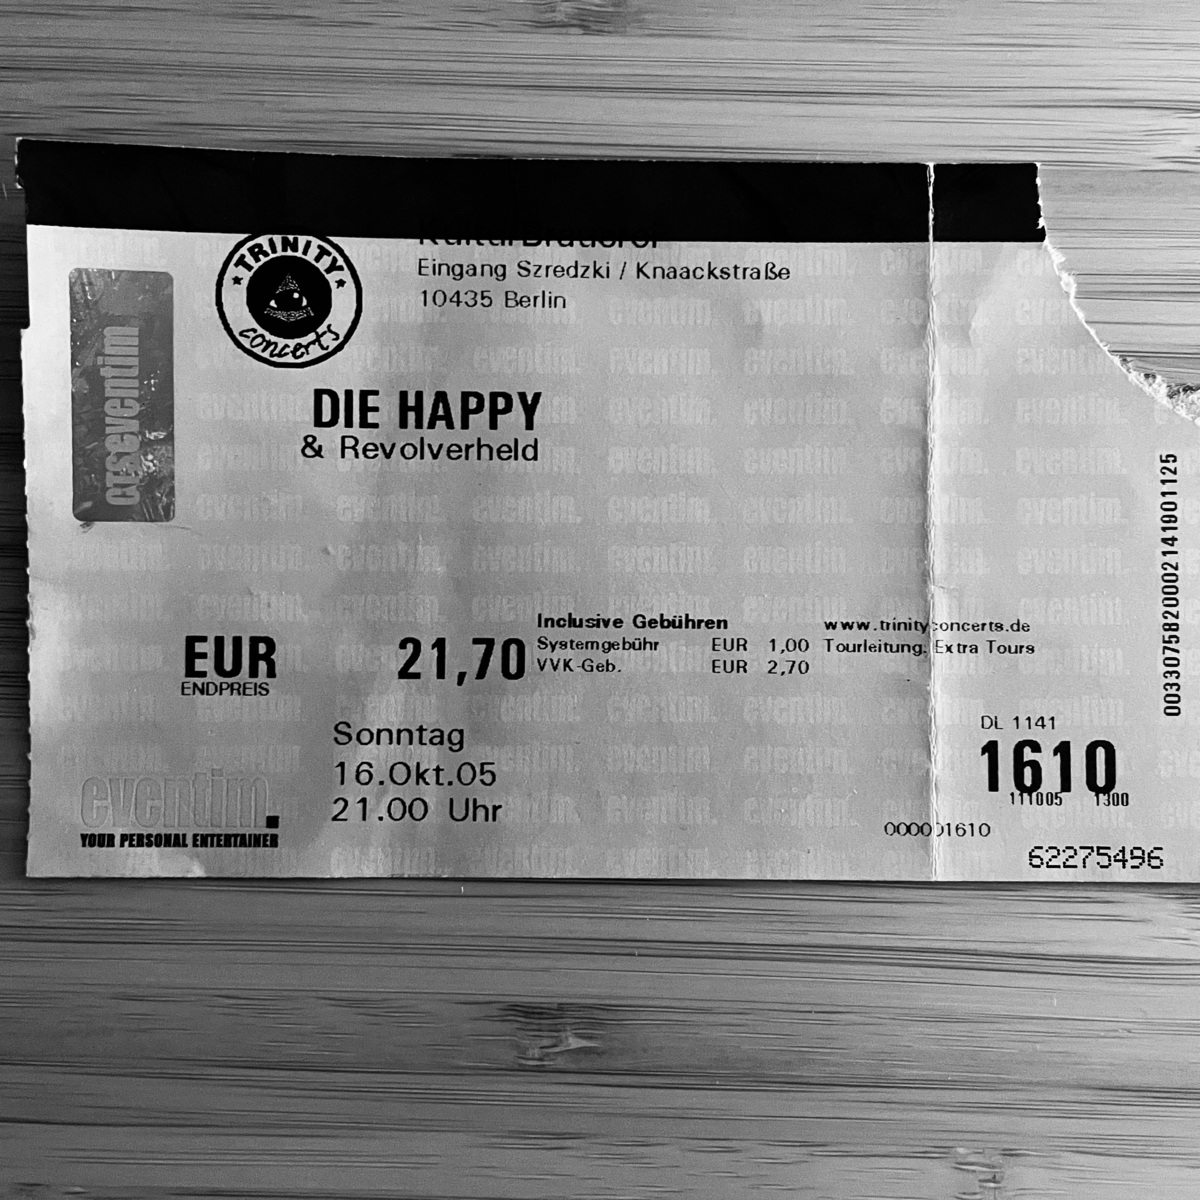 Die Happy Concert & Tour History (Updated for 2023) | Concert Archives